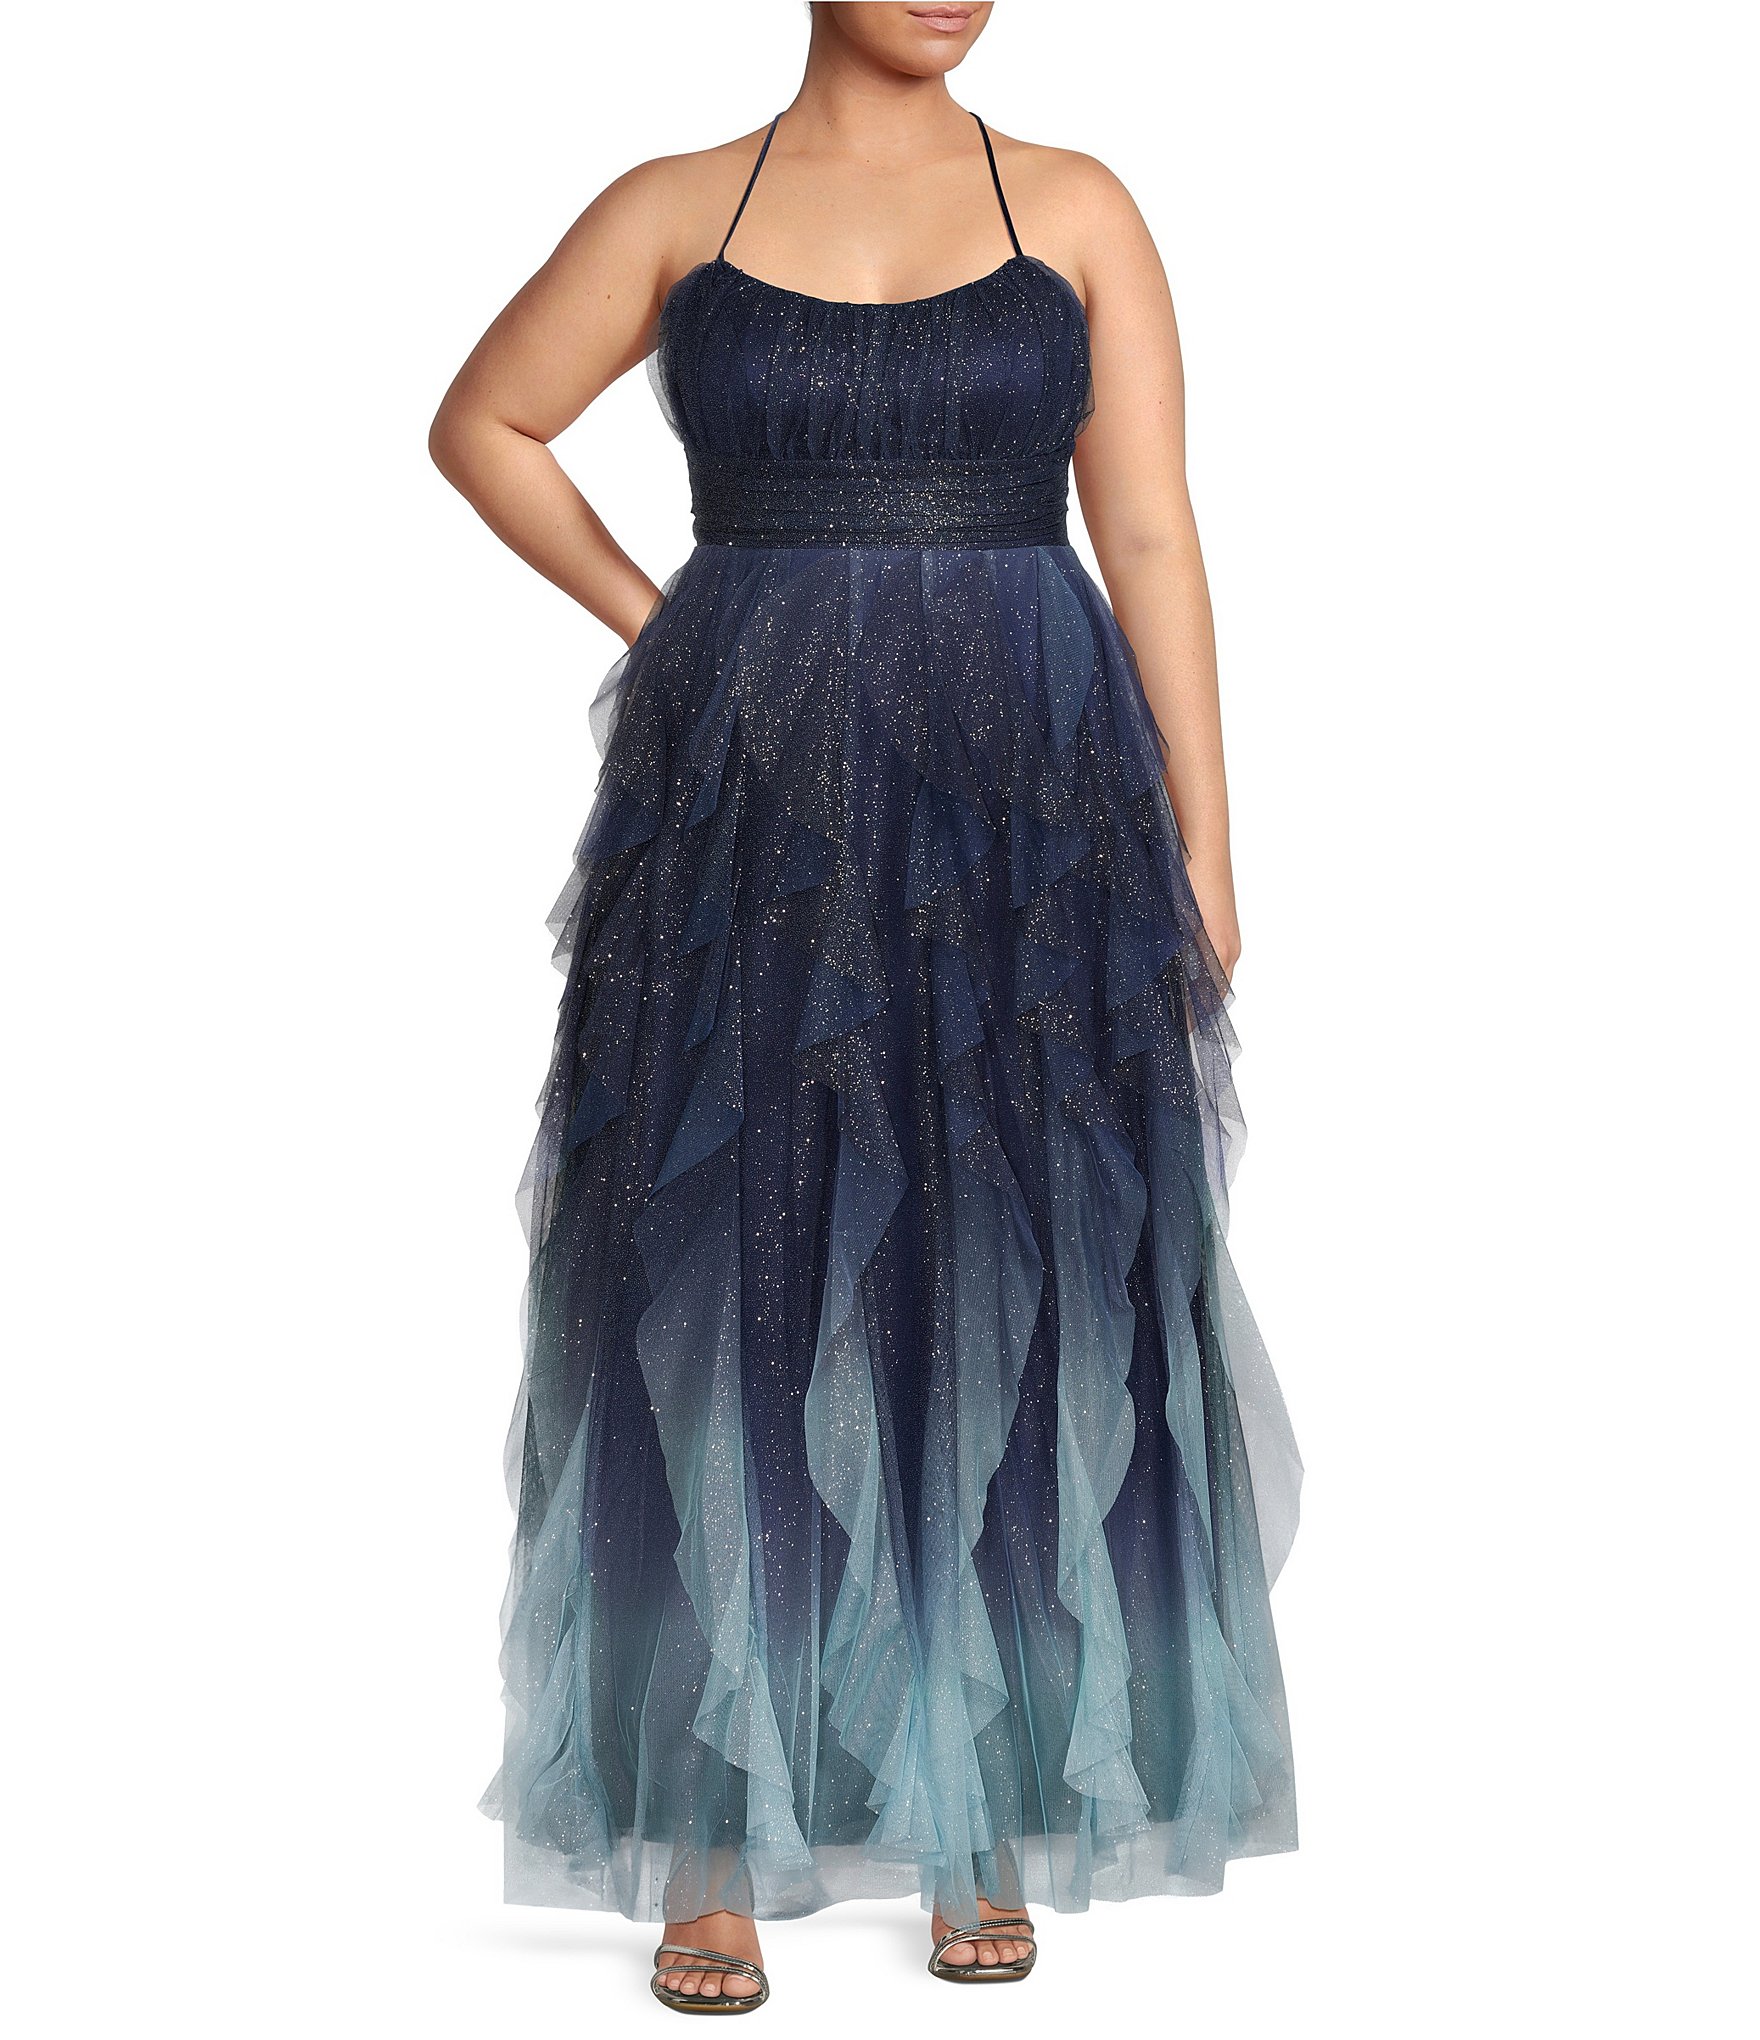 Juniors' Plus-Size Homecoming, Prom & Formal Dresses